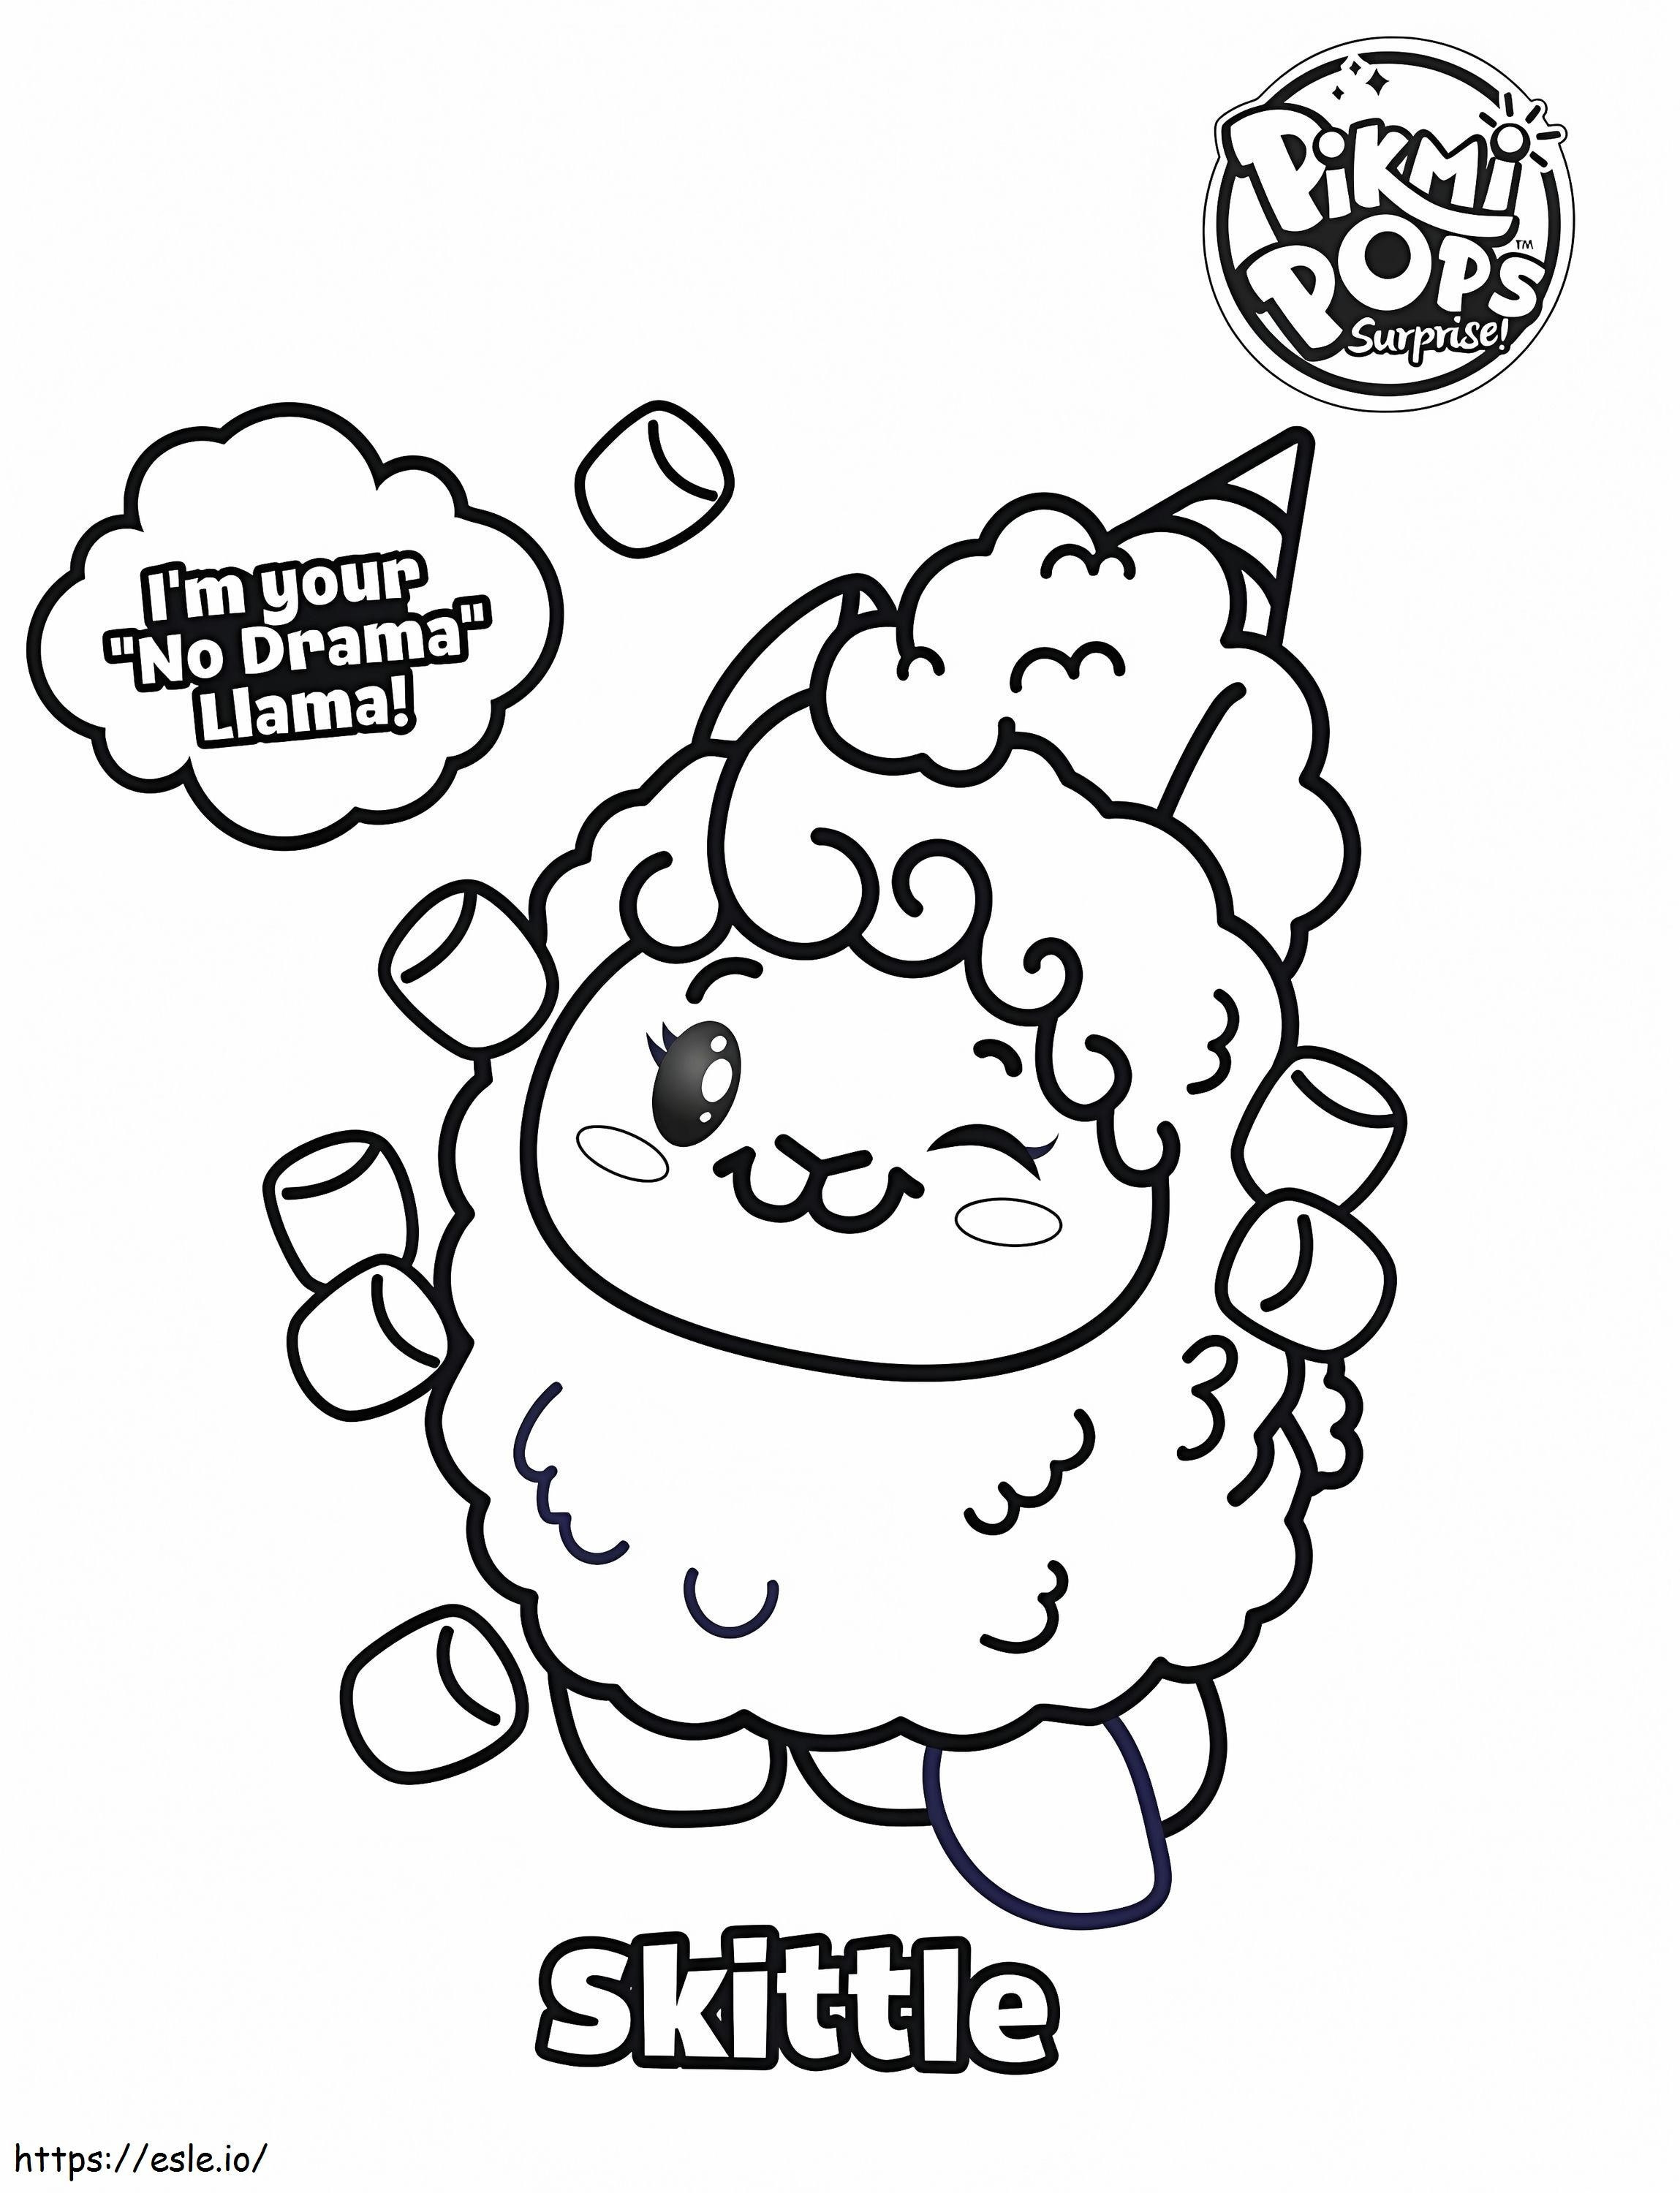 Pikmi Pops S2 Coloring Sheet Skittle coloring page